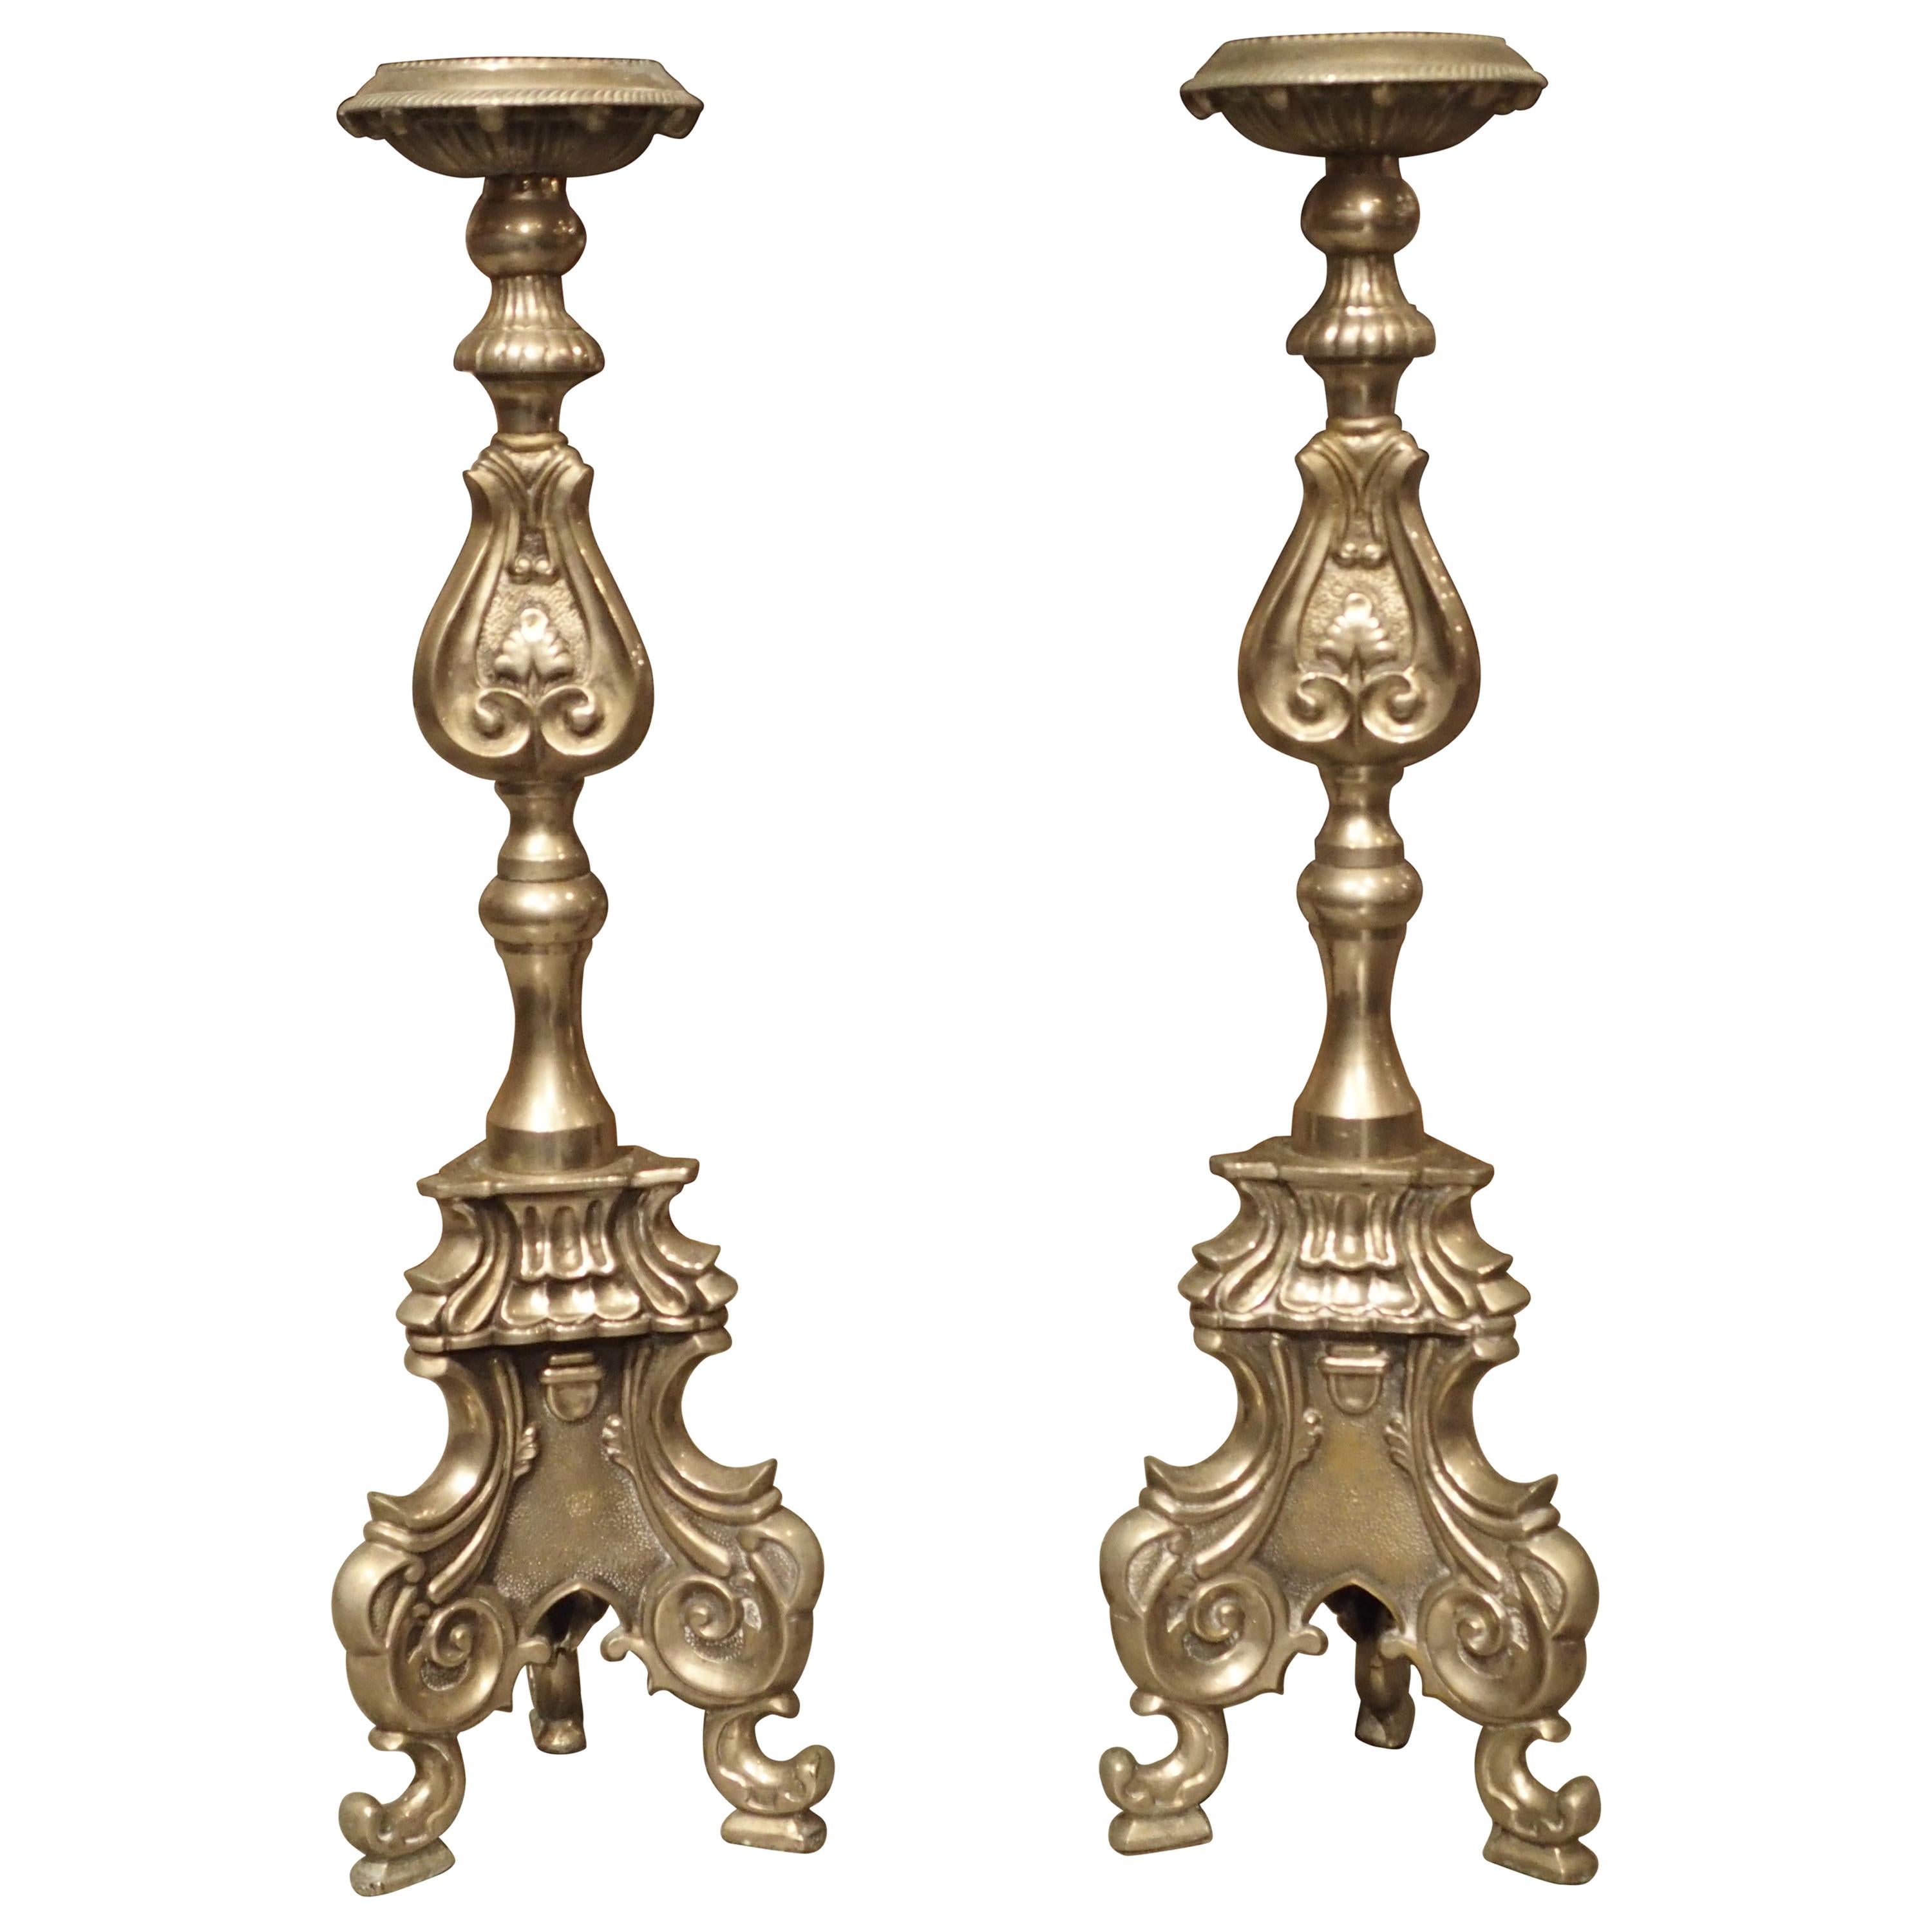 Pair of Antique Italian Silvered Bronze Candlesticks, Circa 1880 For Sale